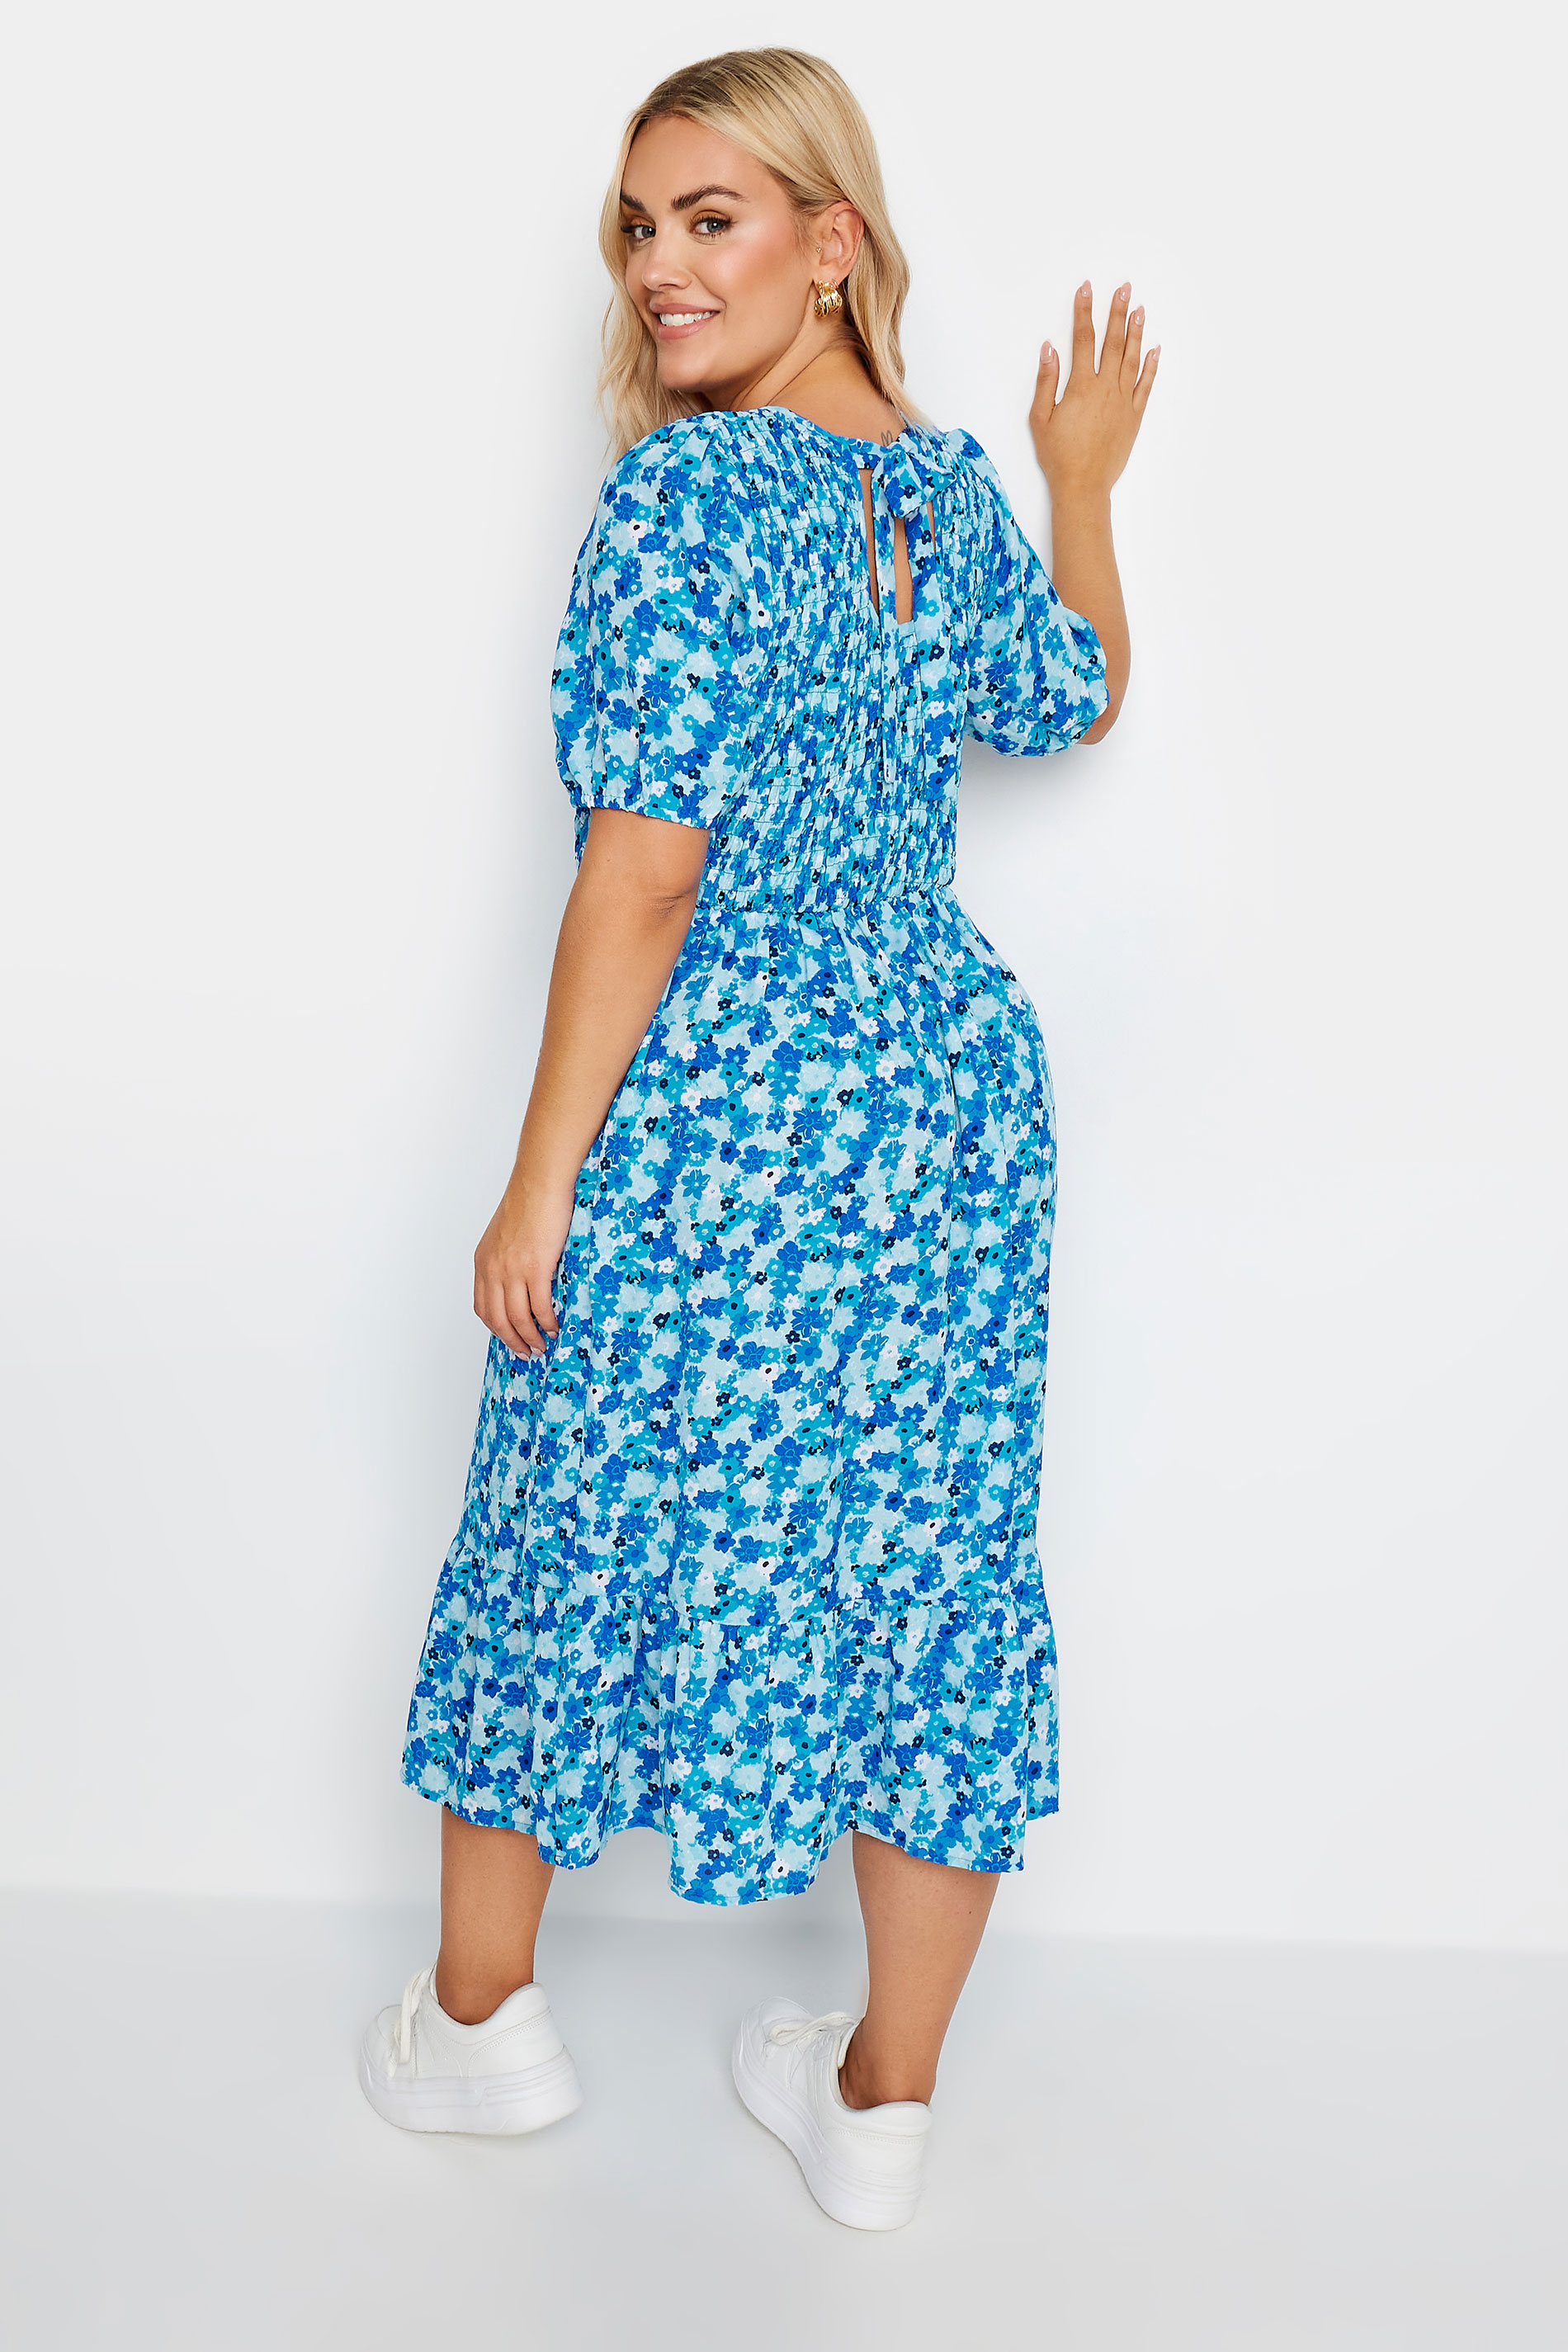 LIMITED COLLECTION Plus Size Blue Floral Print Shirred Midaxi Dress | Yours Clothing 3